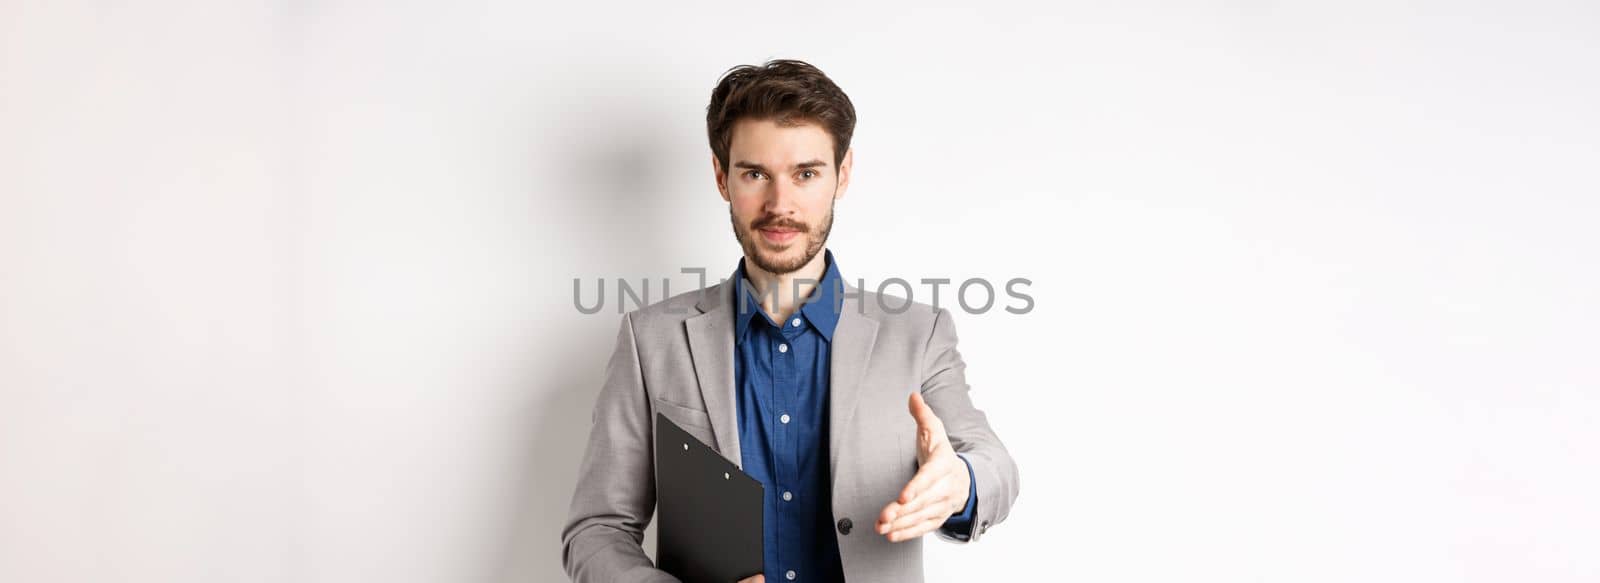 Confident businessman with clipboard giving hand for handshake, greeting business partners on meeting, standing on white background in suit.